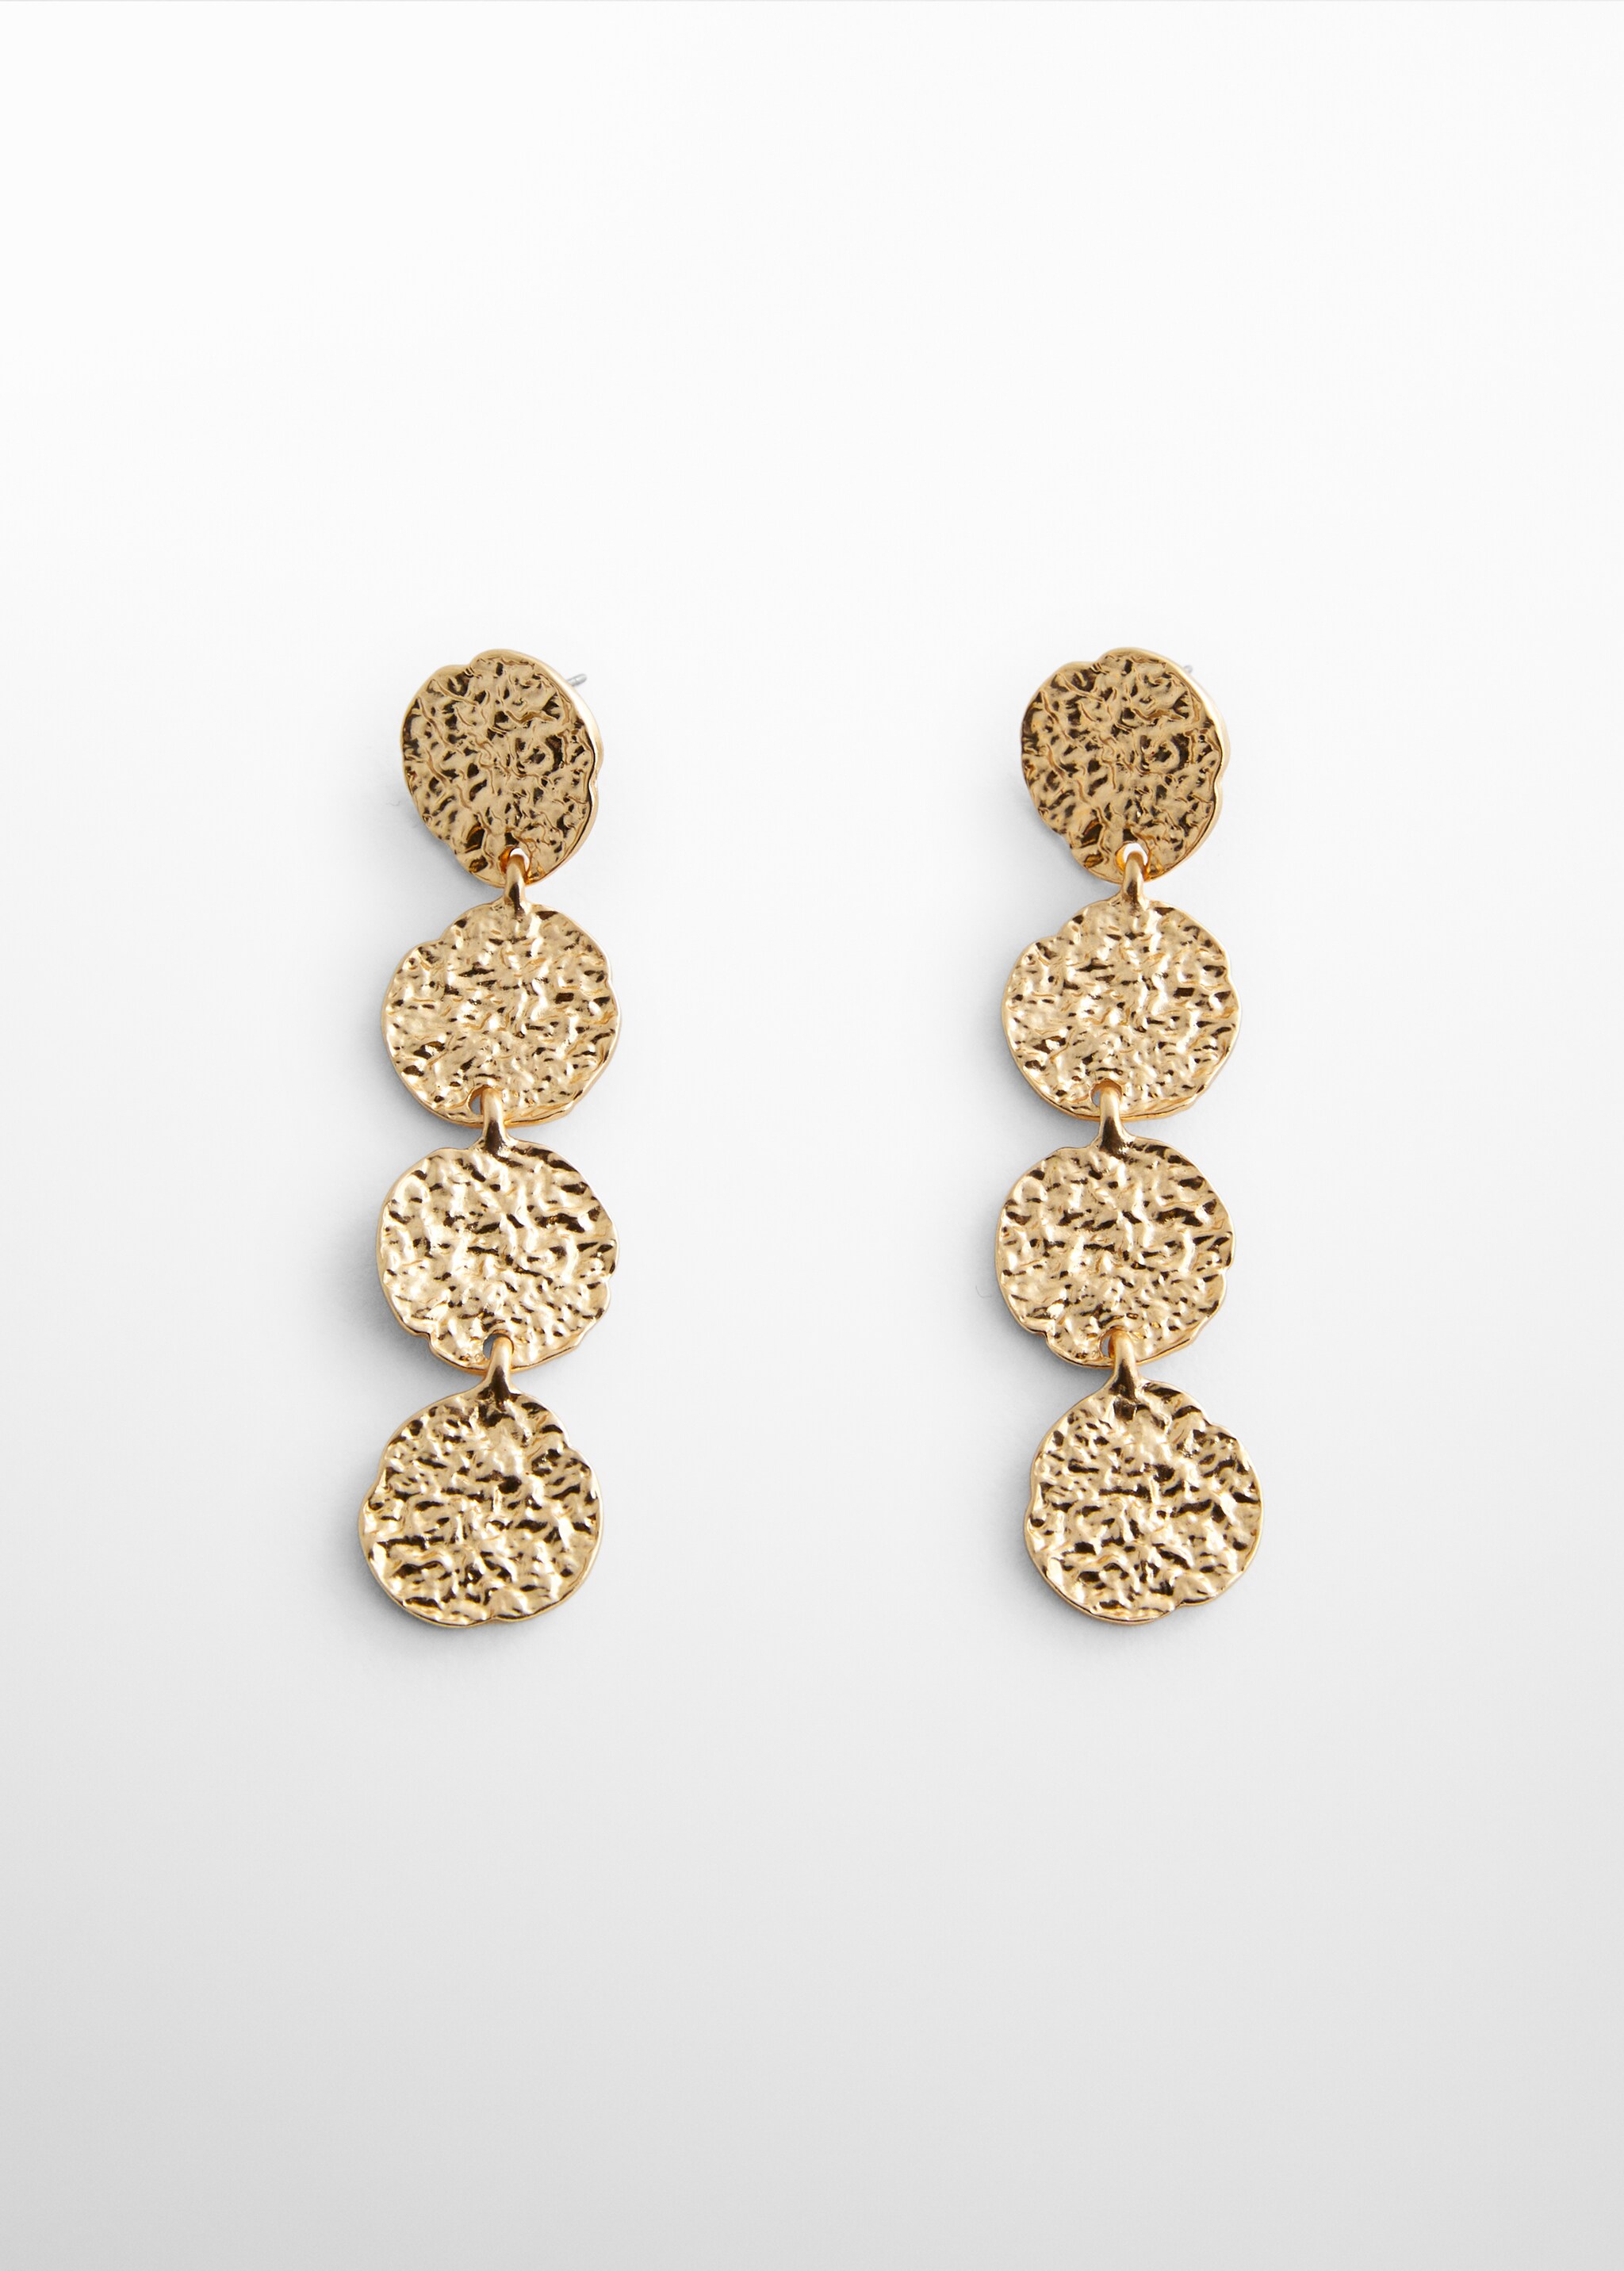 Long coin earrings  - Article without model